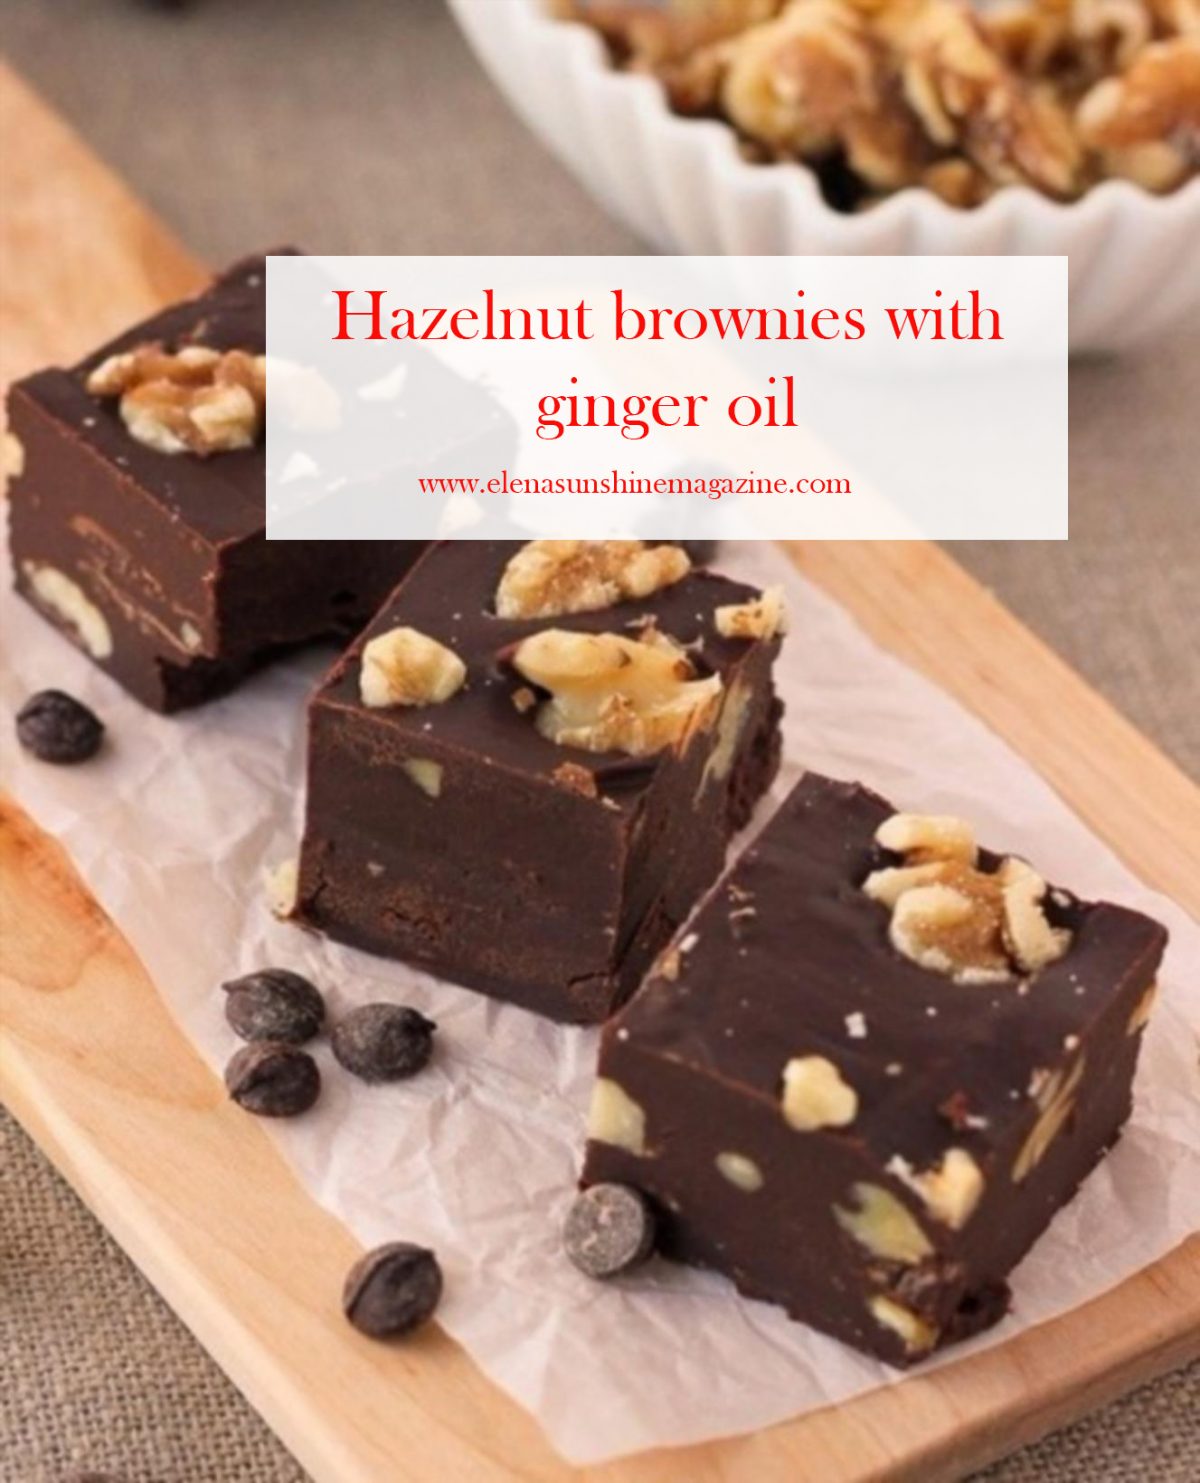 Hazelnut brownies with ginger oil